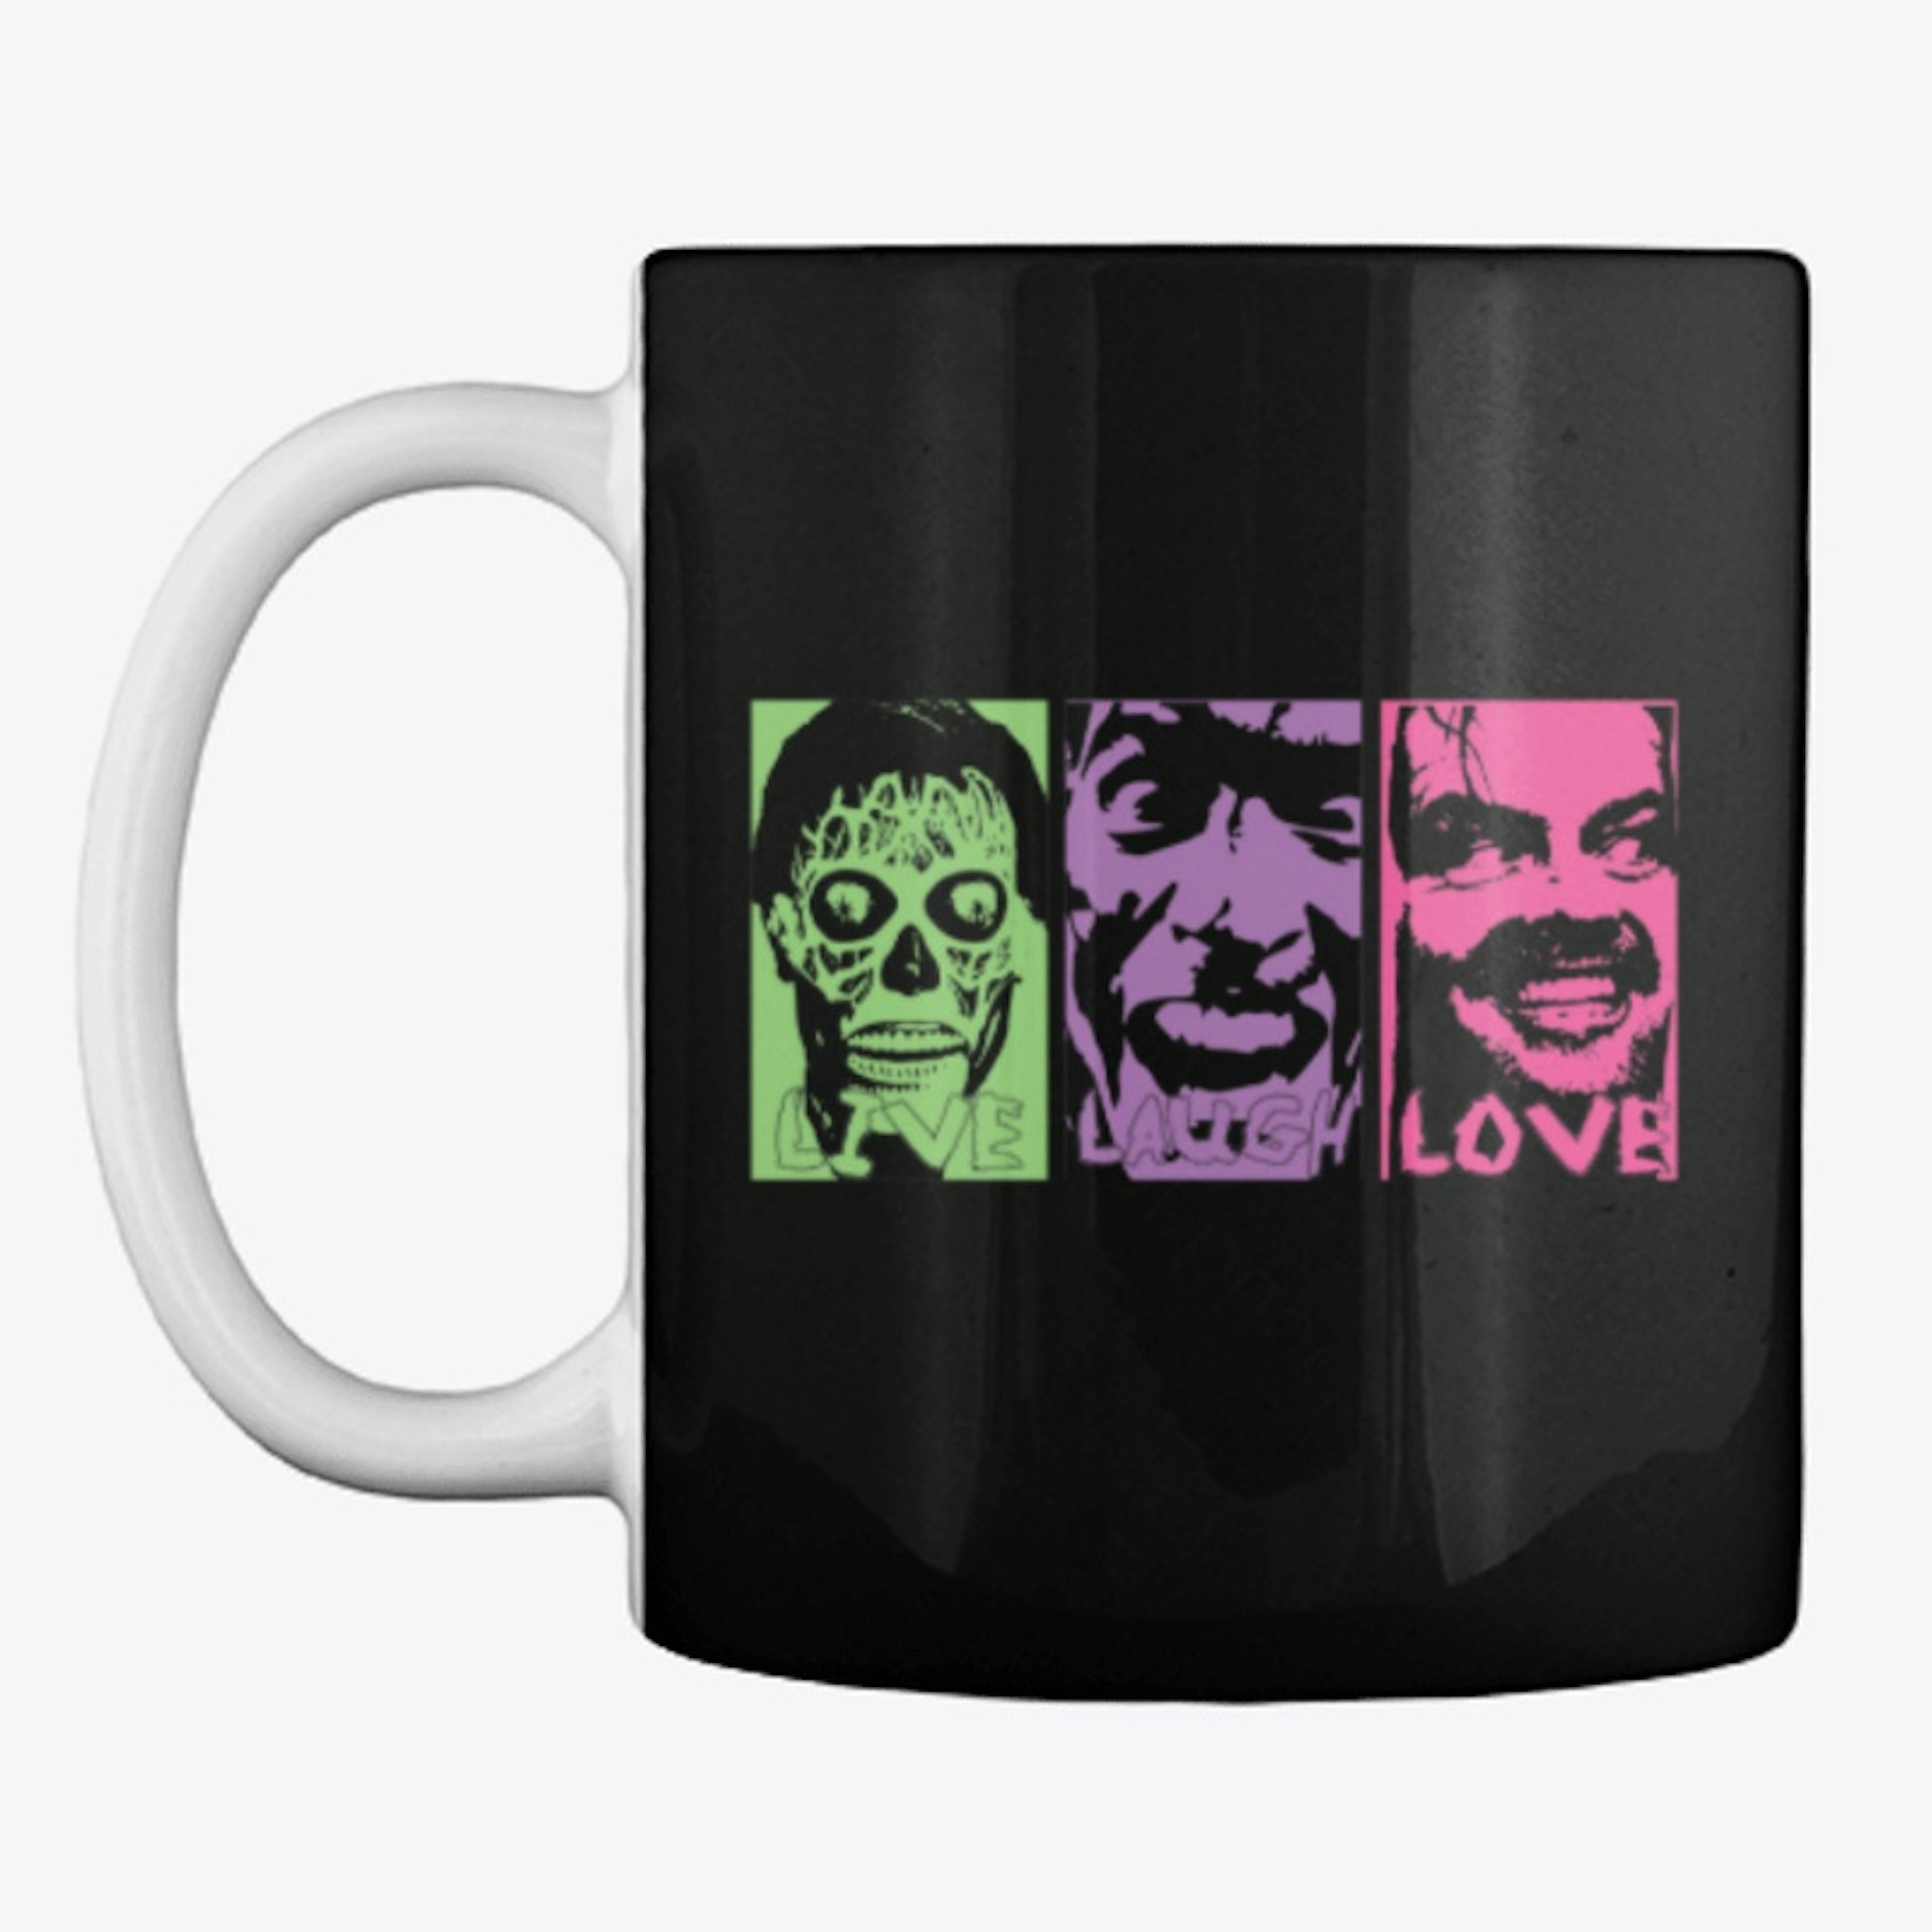 They Live , You Laugh, We Love